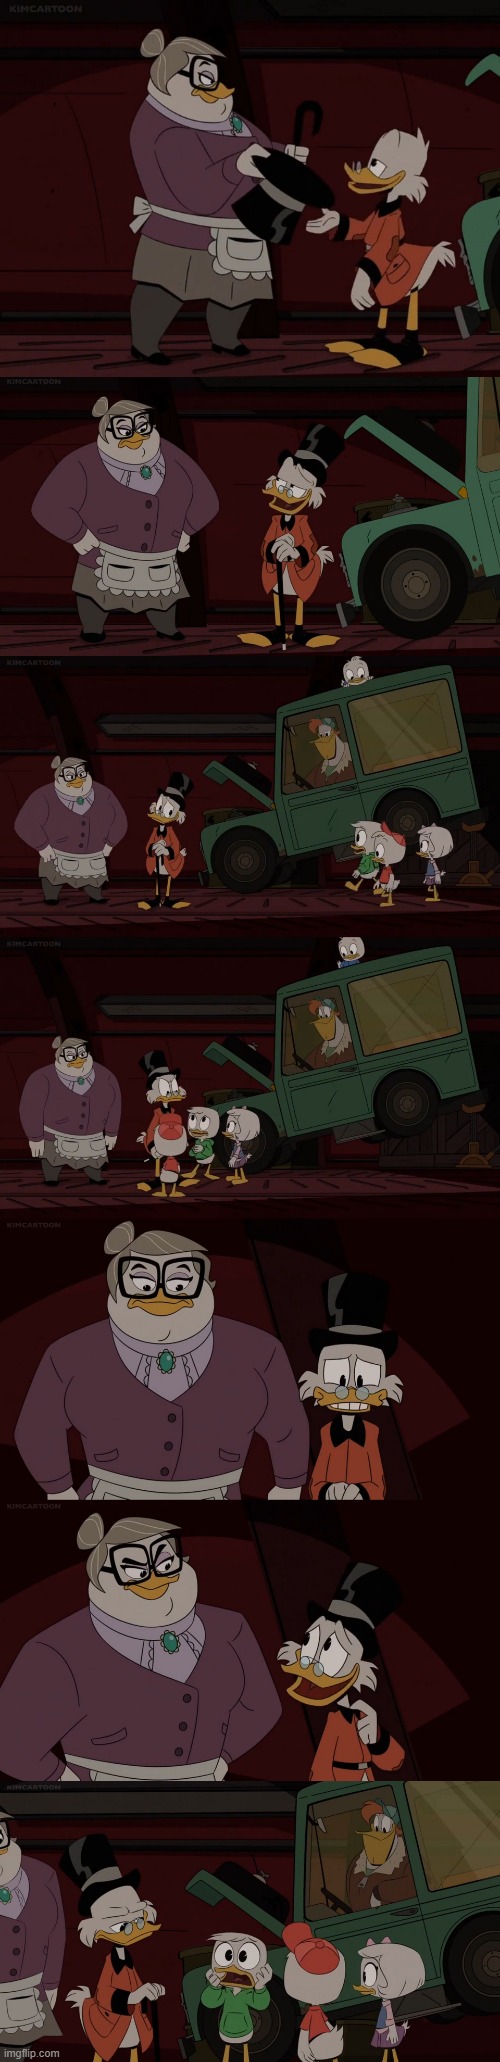 Ducktales we are worried about our safety | image tagged in ducktales,safety,coronavirus | made w/ Imgflip meme maker